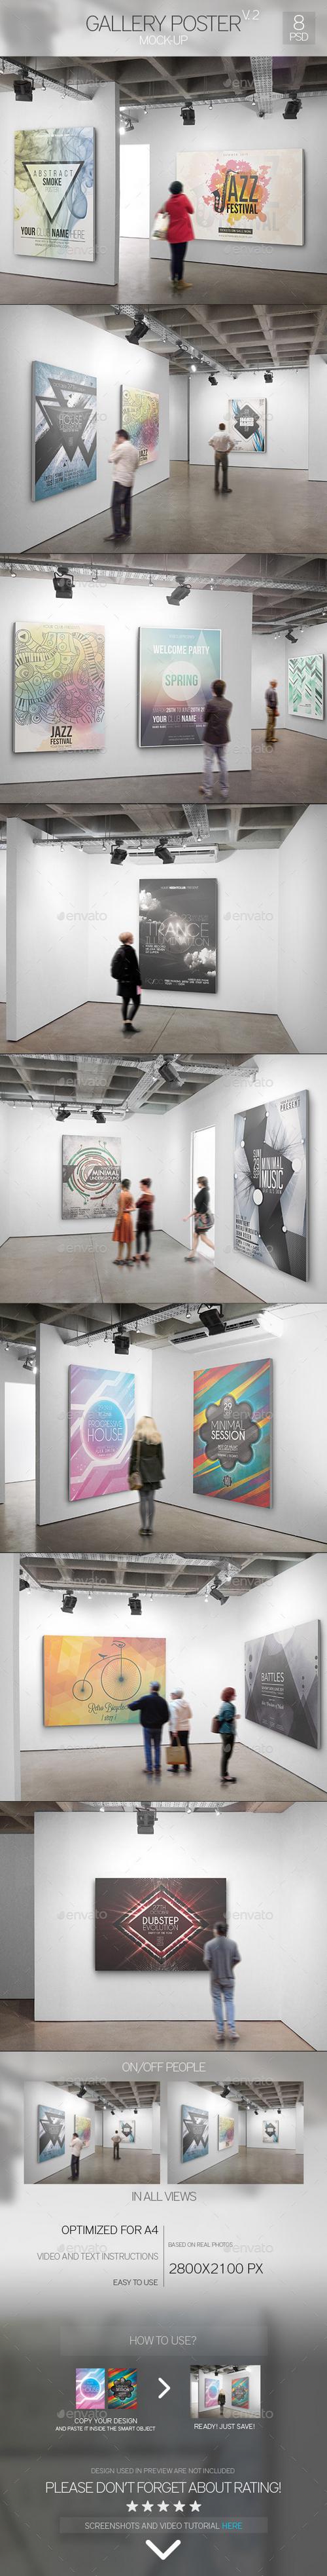 GraphicRiver: Gallery Poster Mock-Up 2 - 11064024